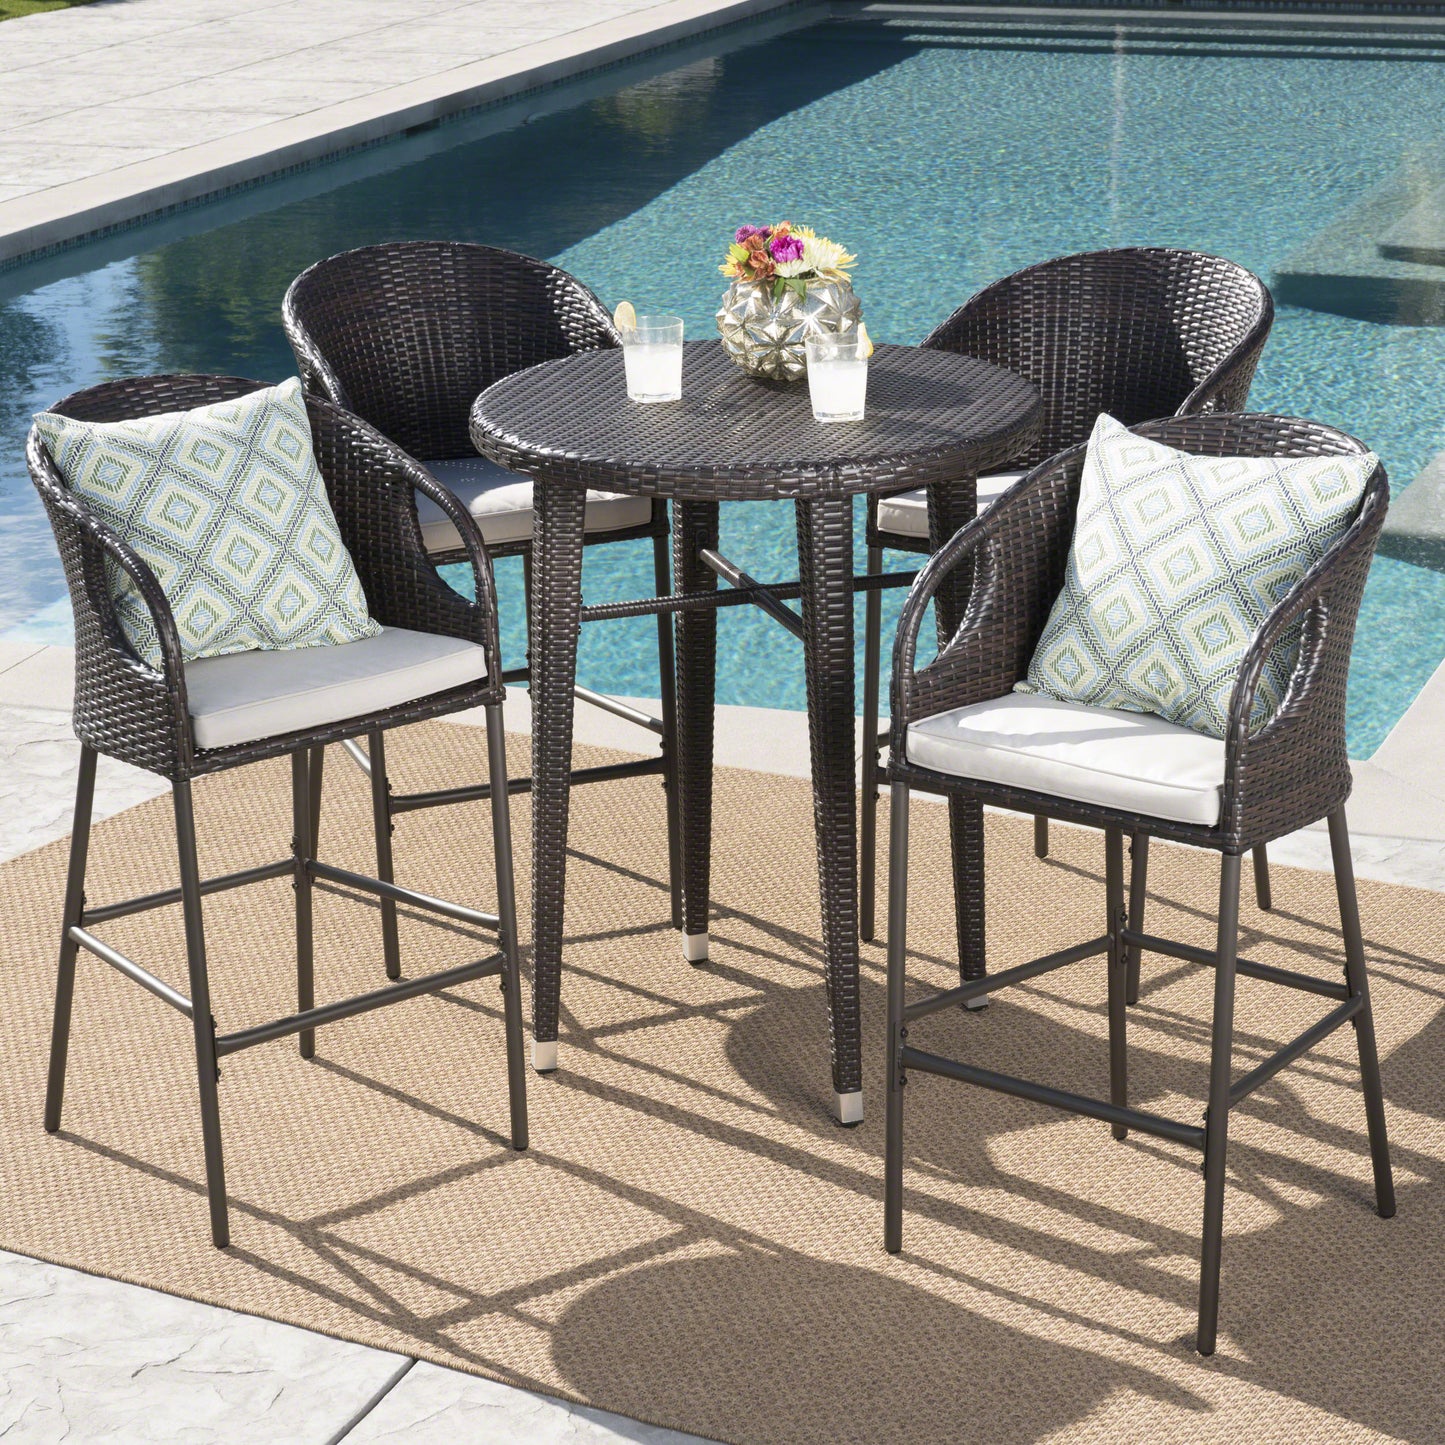 Big Rock Outdoor 5 Piece Wicker Bar Set with Water Resistant Cushions